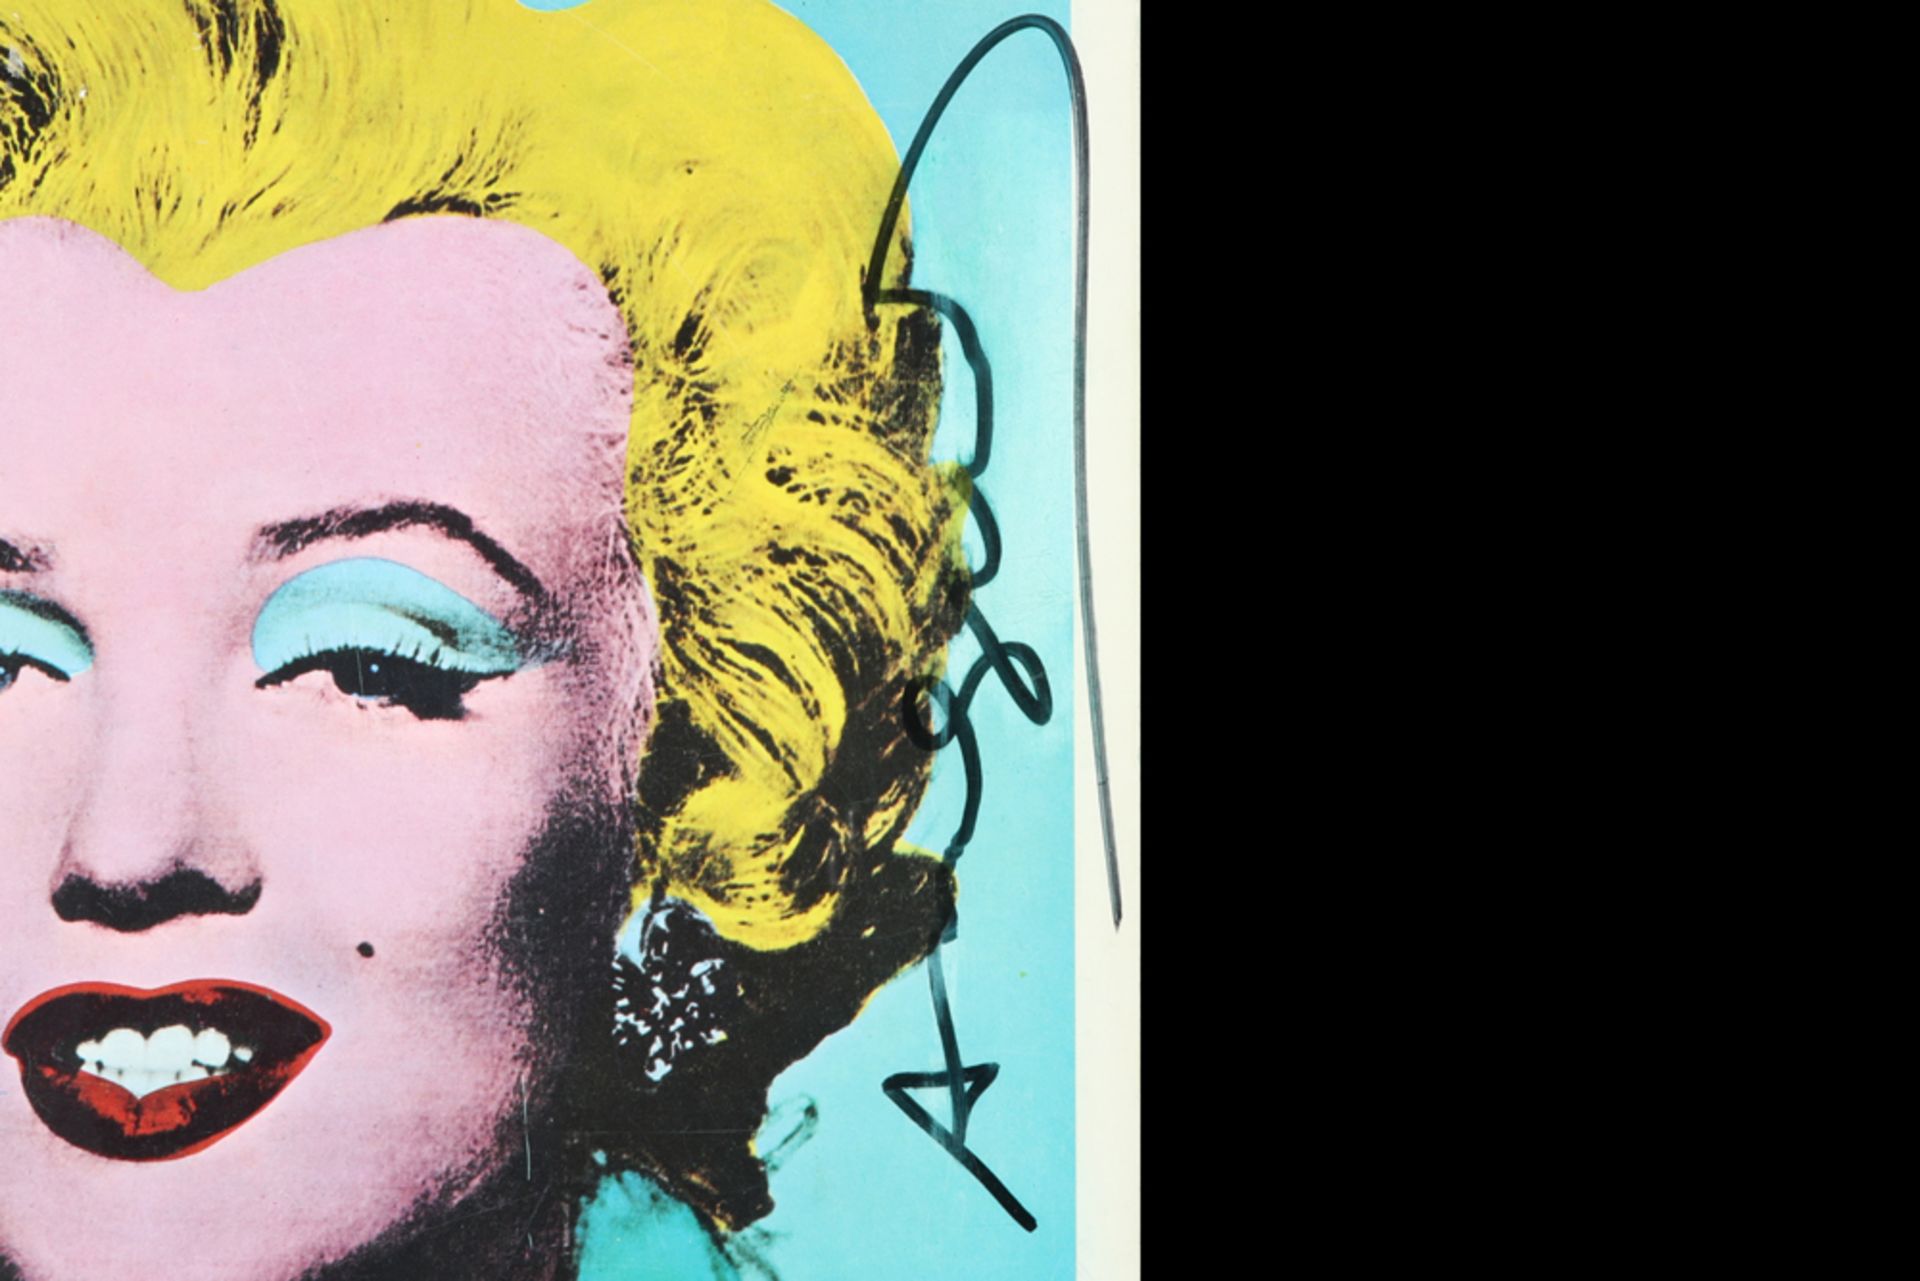 framed Andy Warhol signed catalogue of the 1971 Tate Gallery Exhibition with "Marilyn Monroe" on the - Image 3 of 4